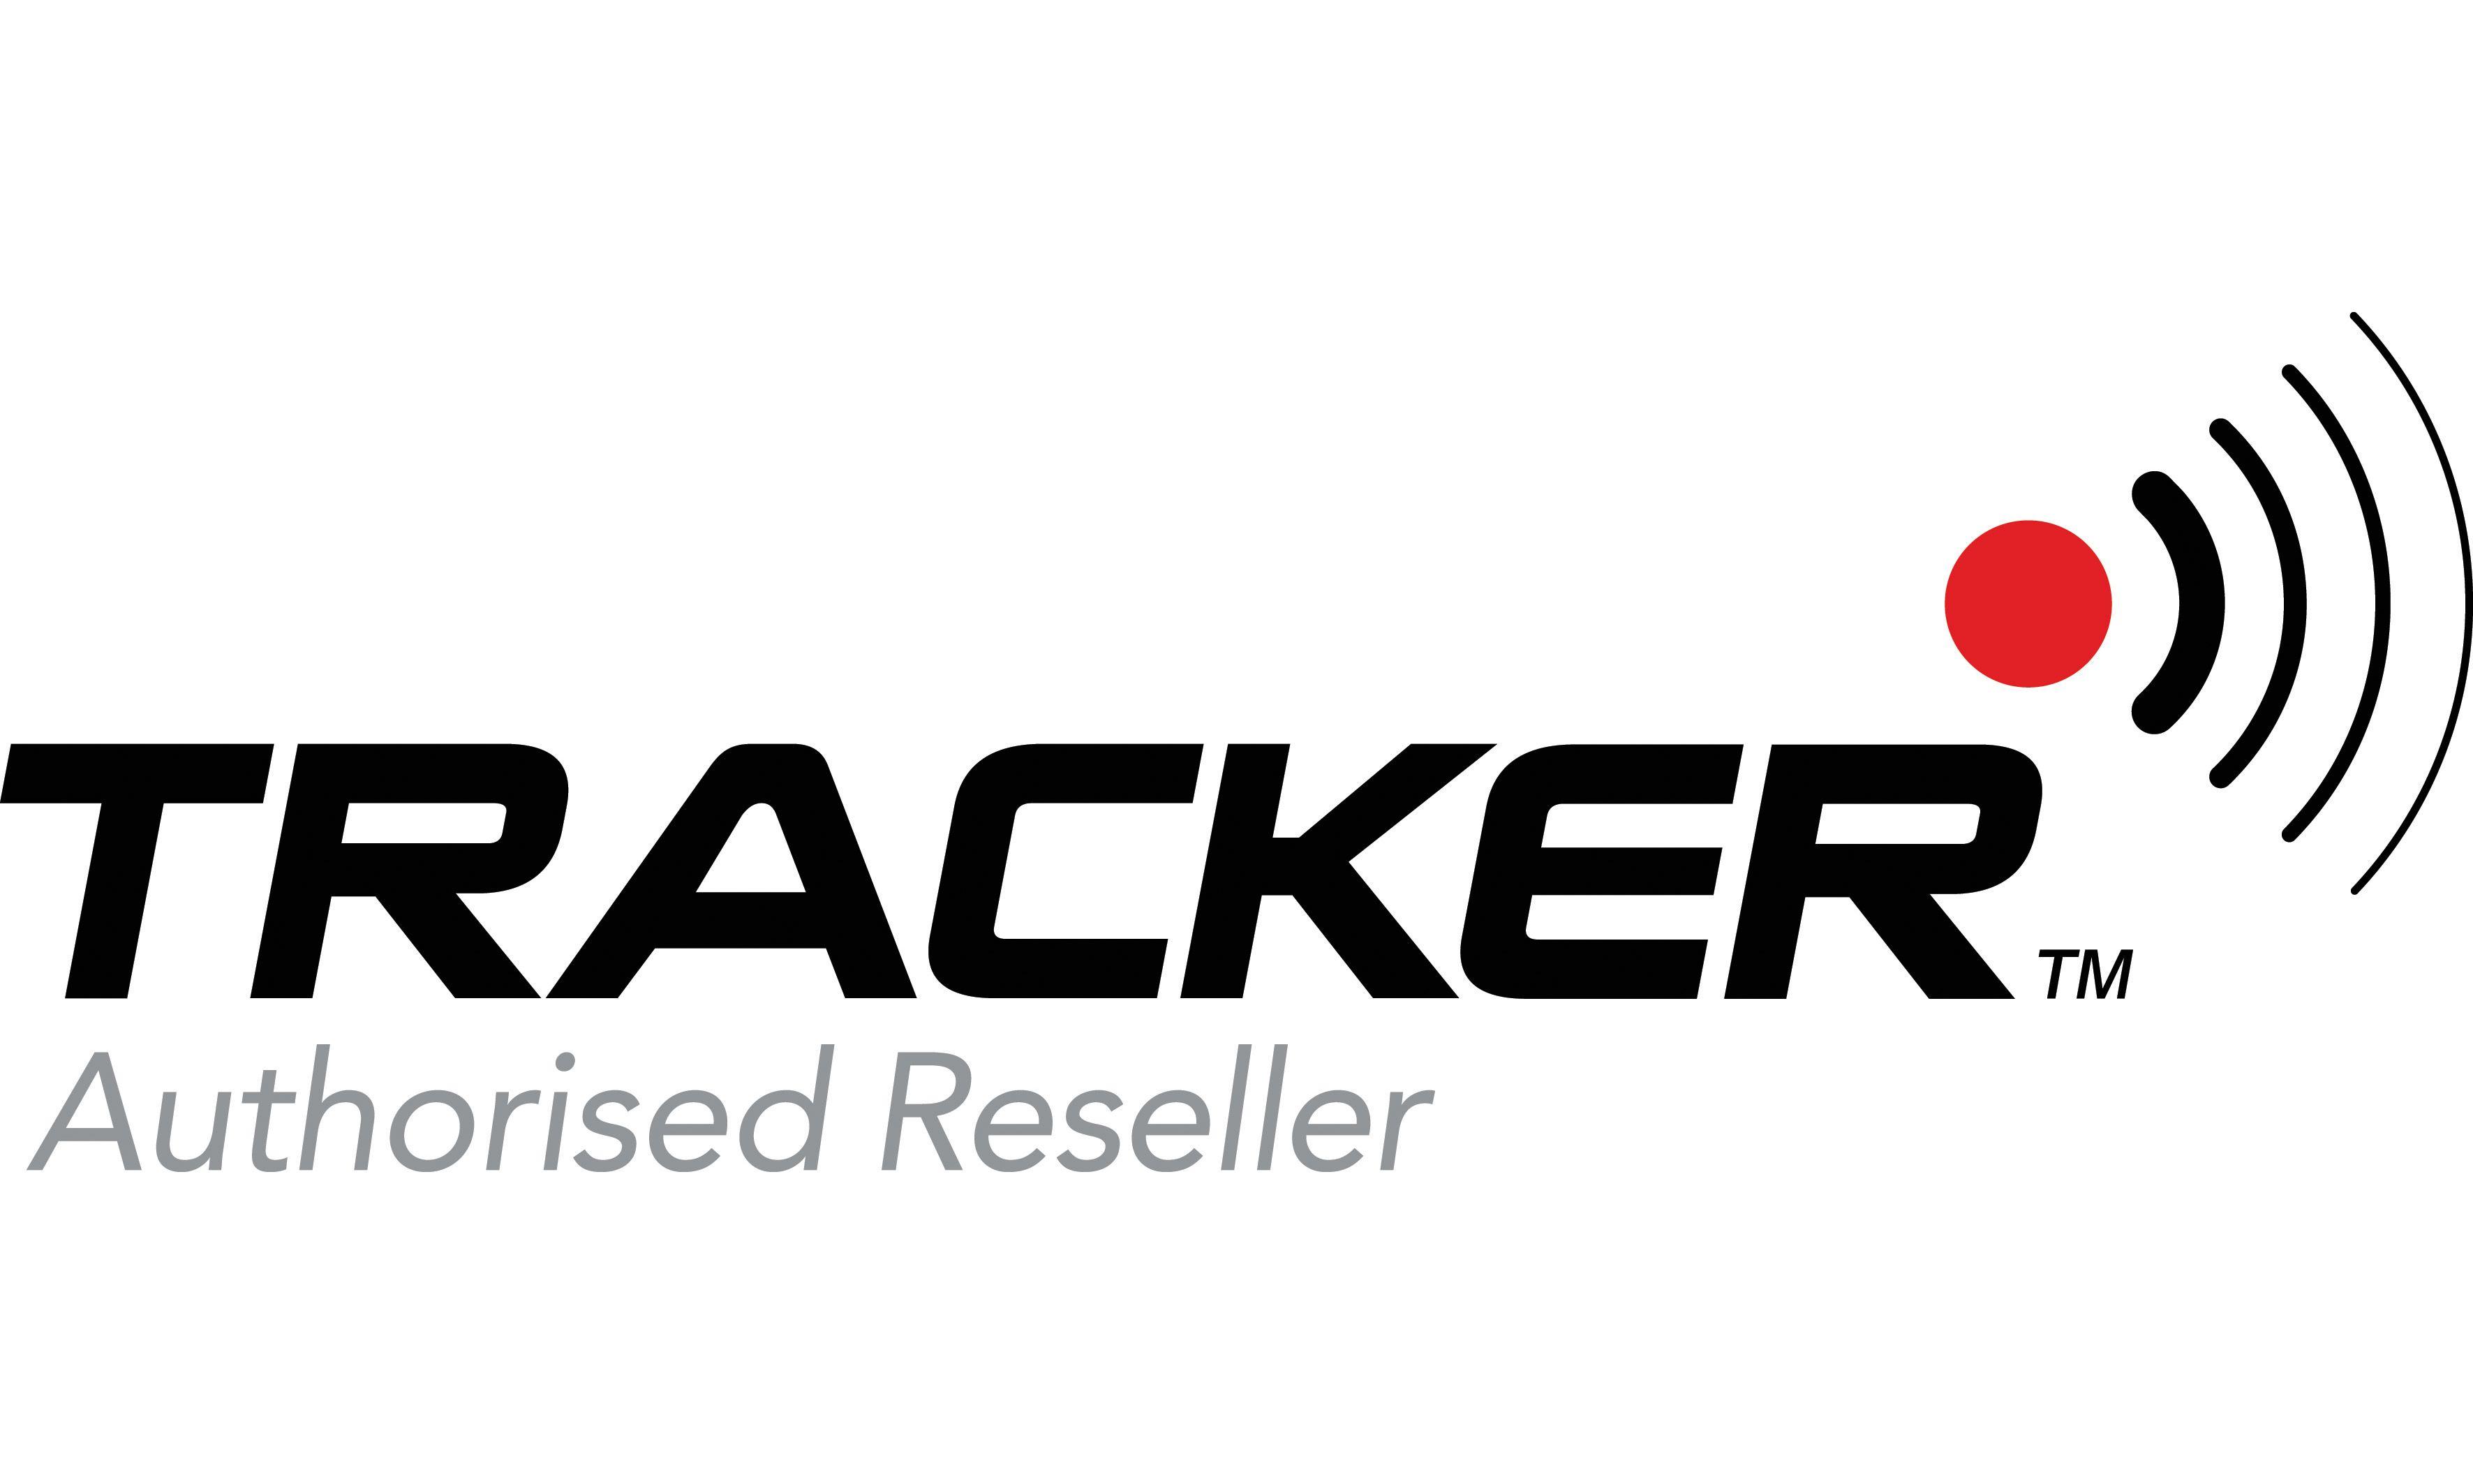 Tracker Logo - TRACKER Authorised Reseller Logo HR Classic And Sports Finance